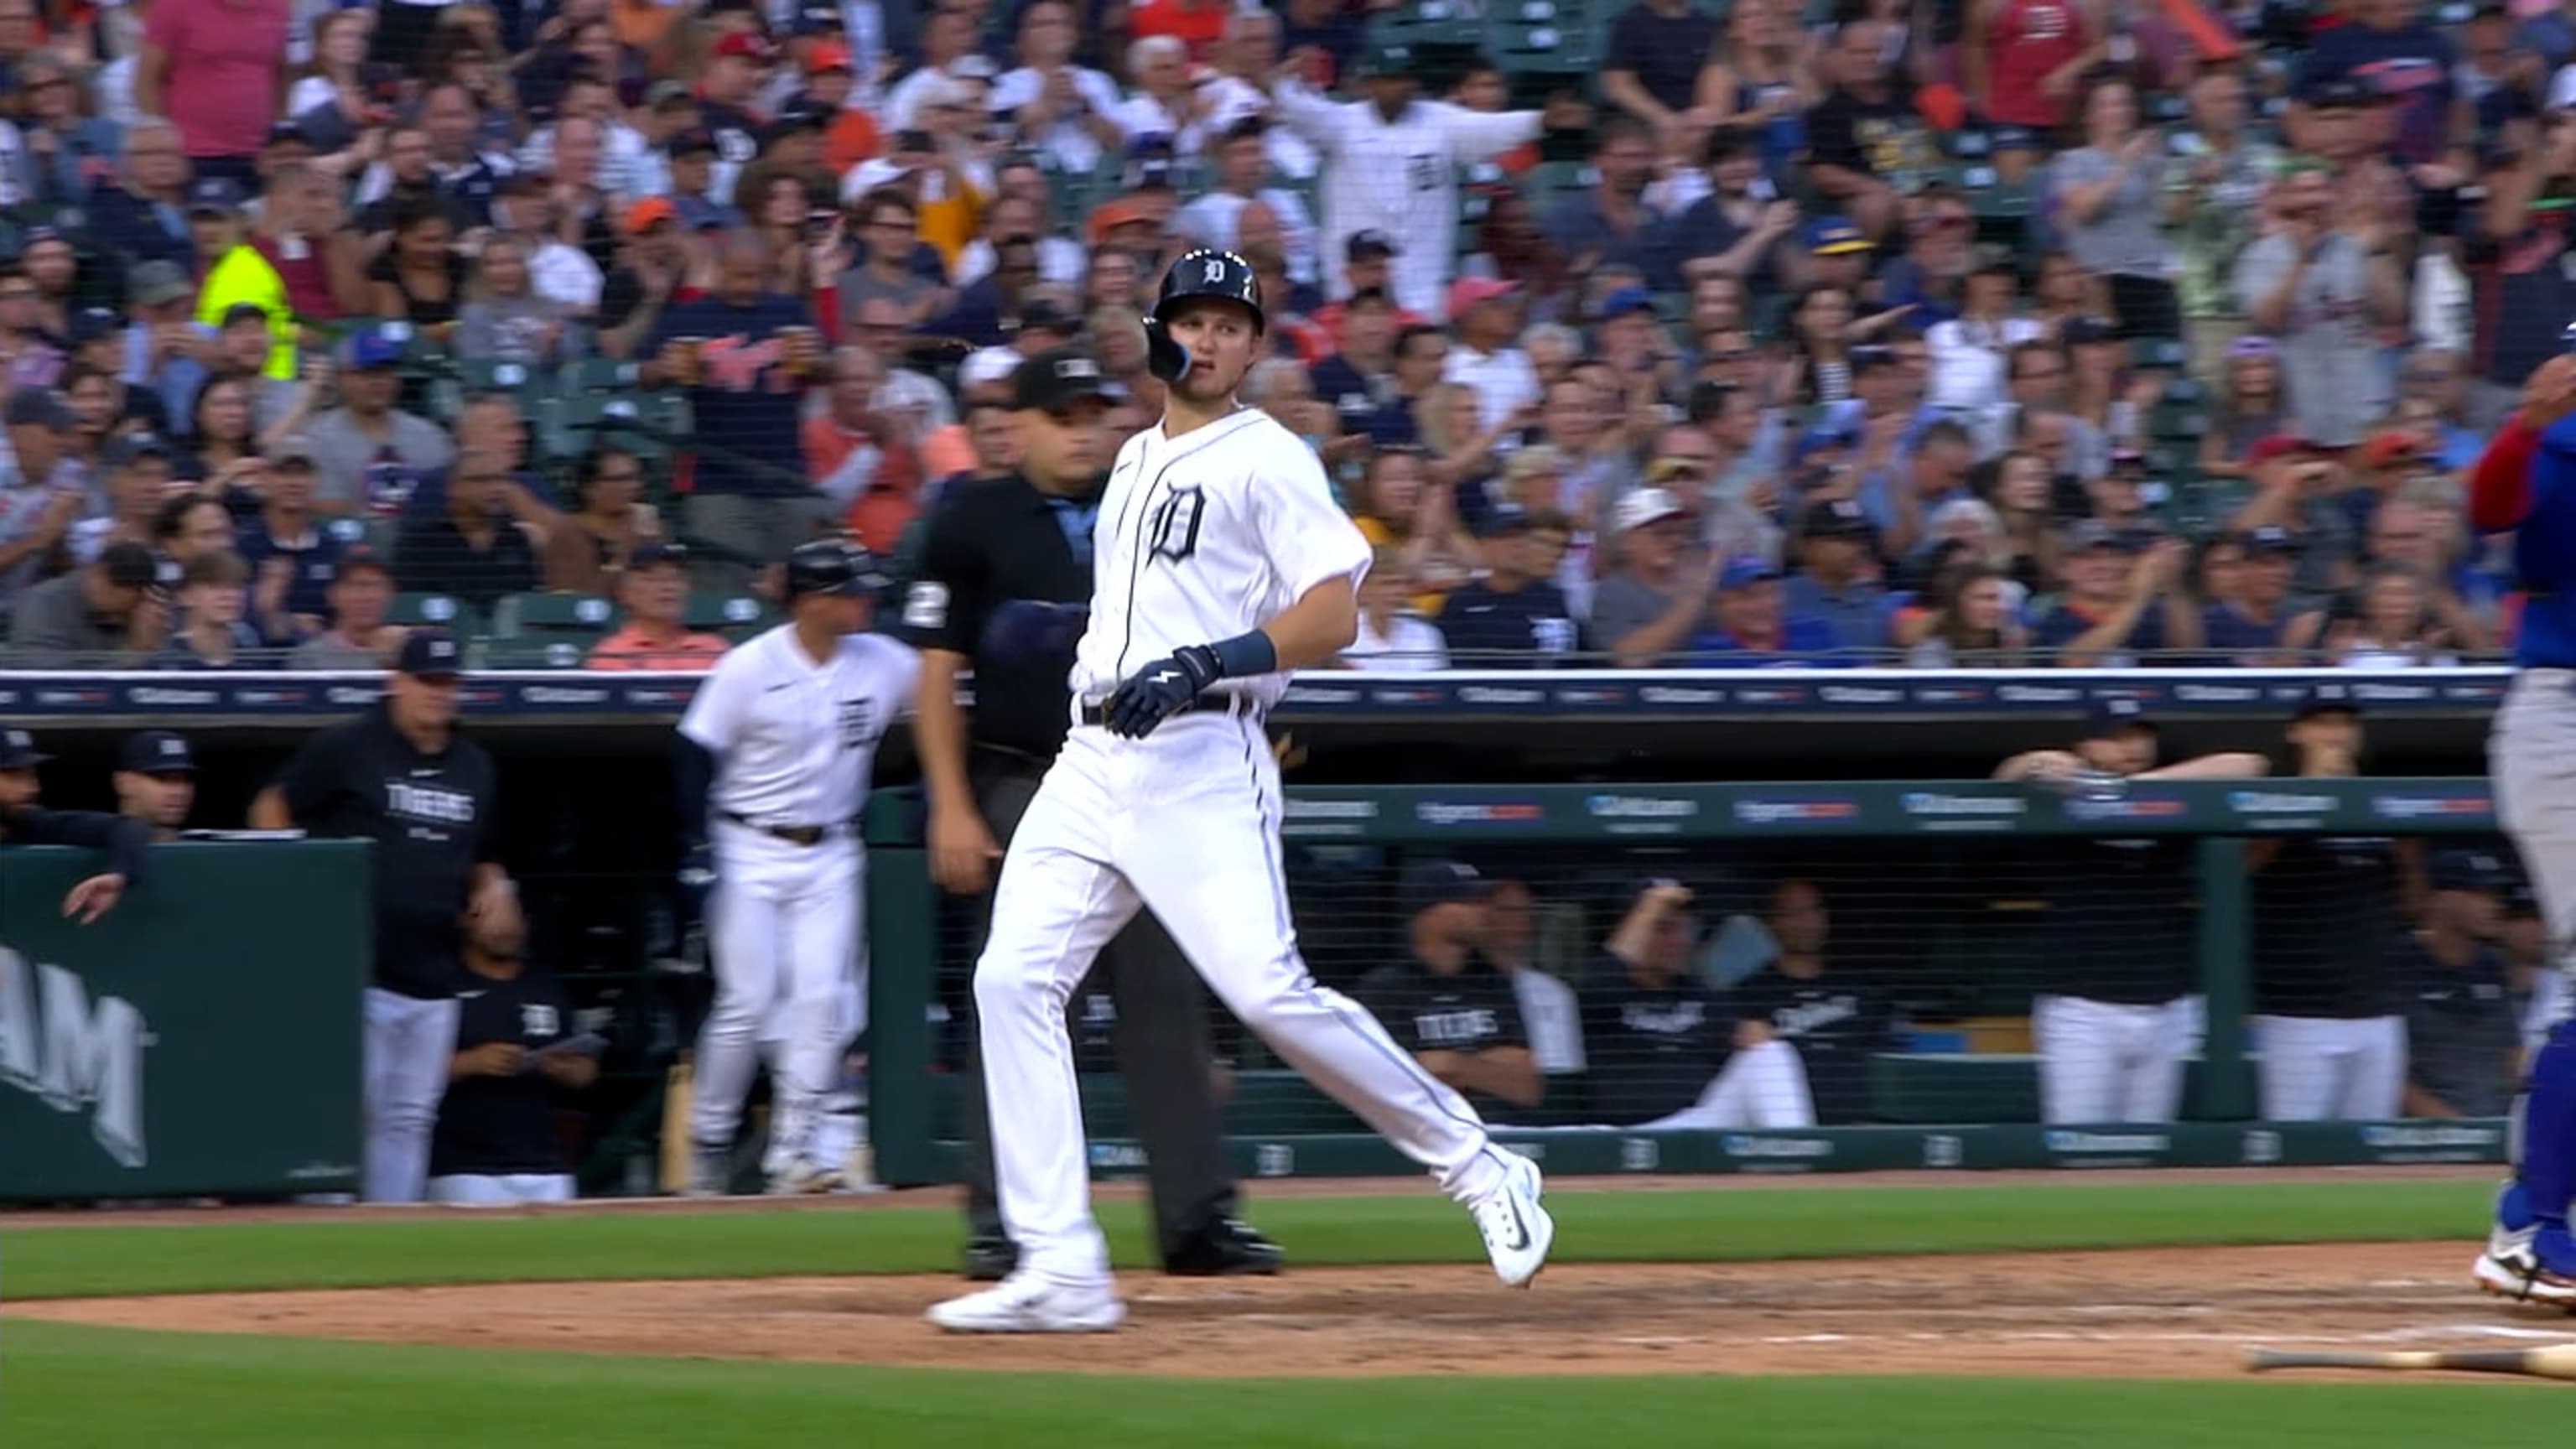 Andy Ibañez homers twice in the Tigers' 8-6 victory over the Cubs